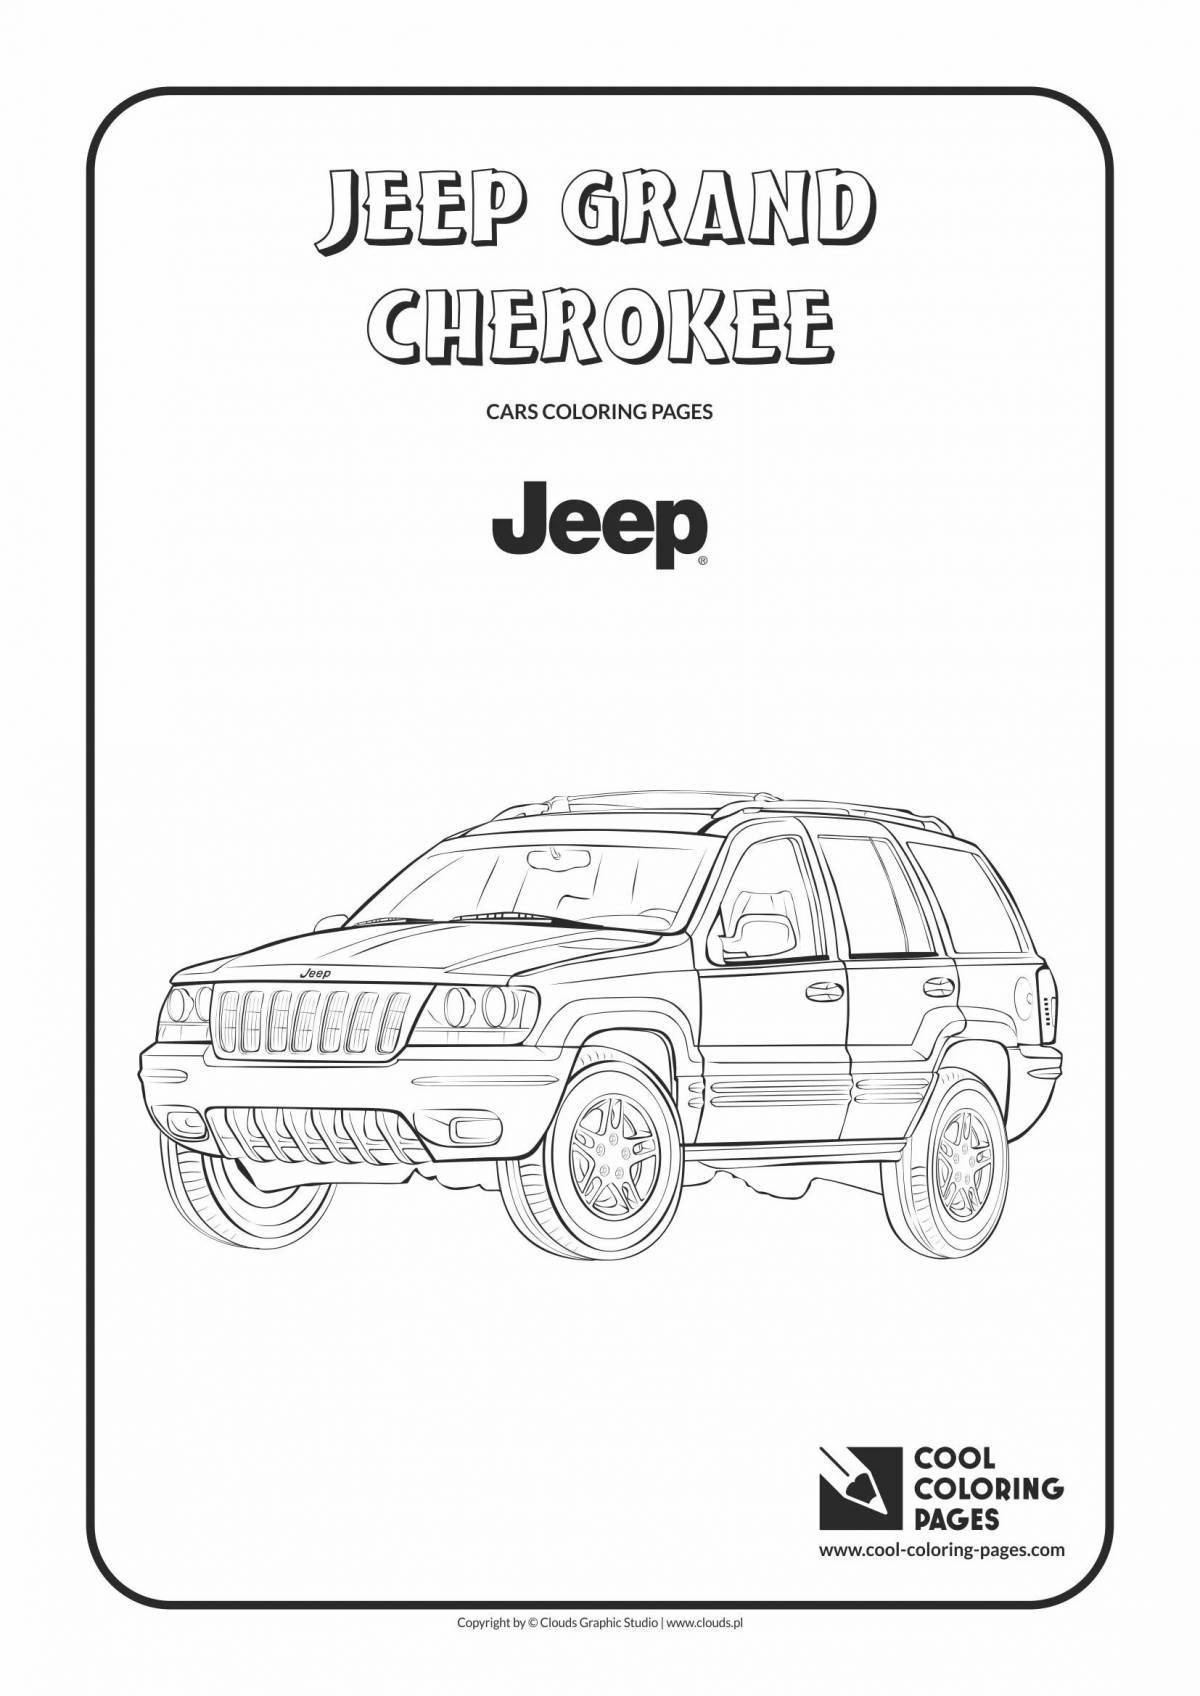 Perfect jeep grand cherokee coloring